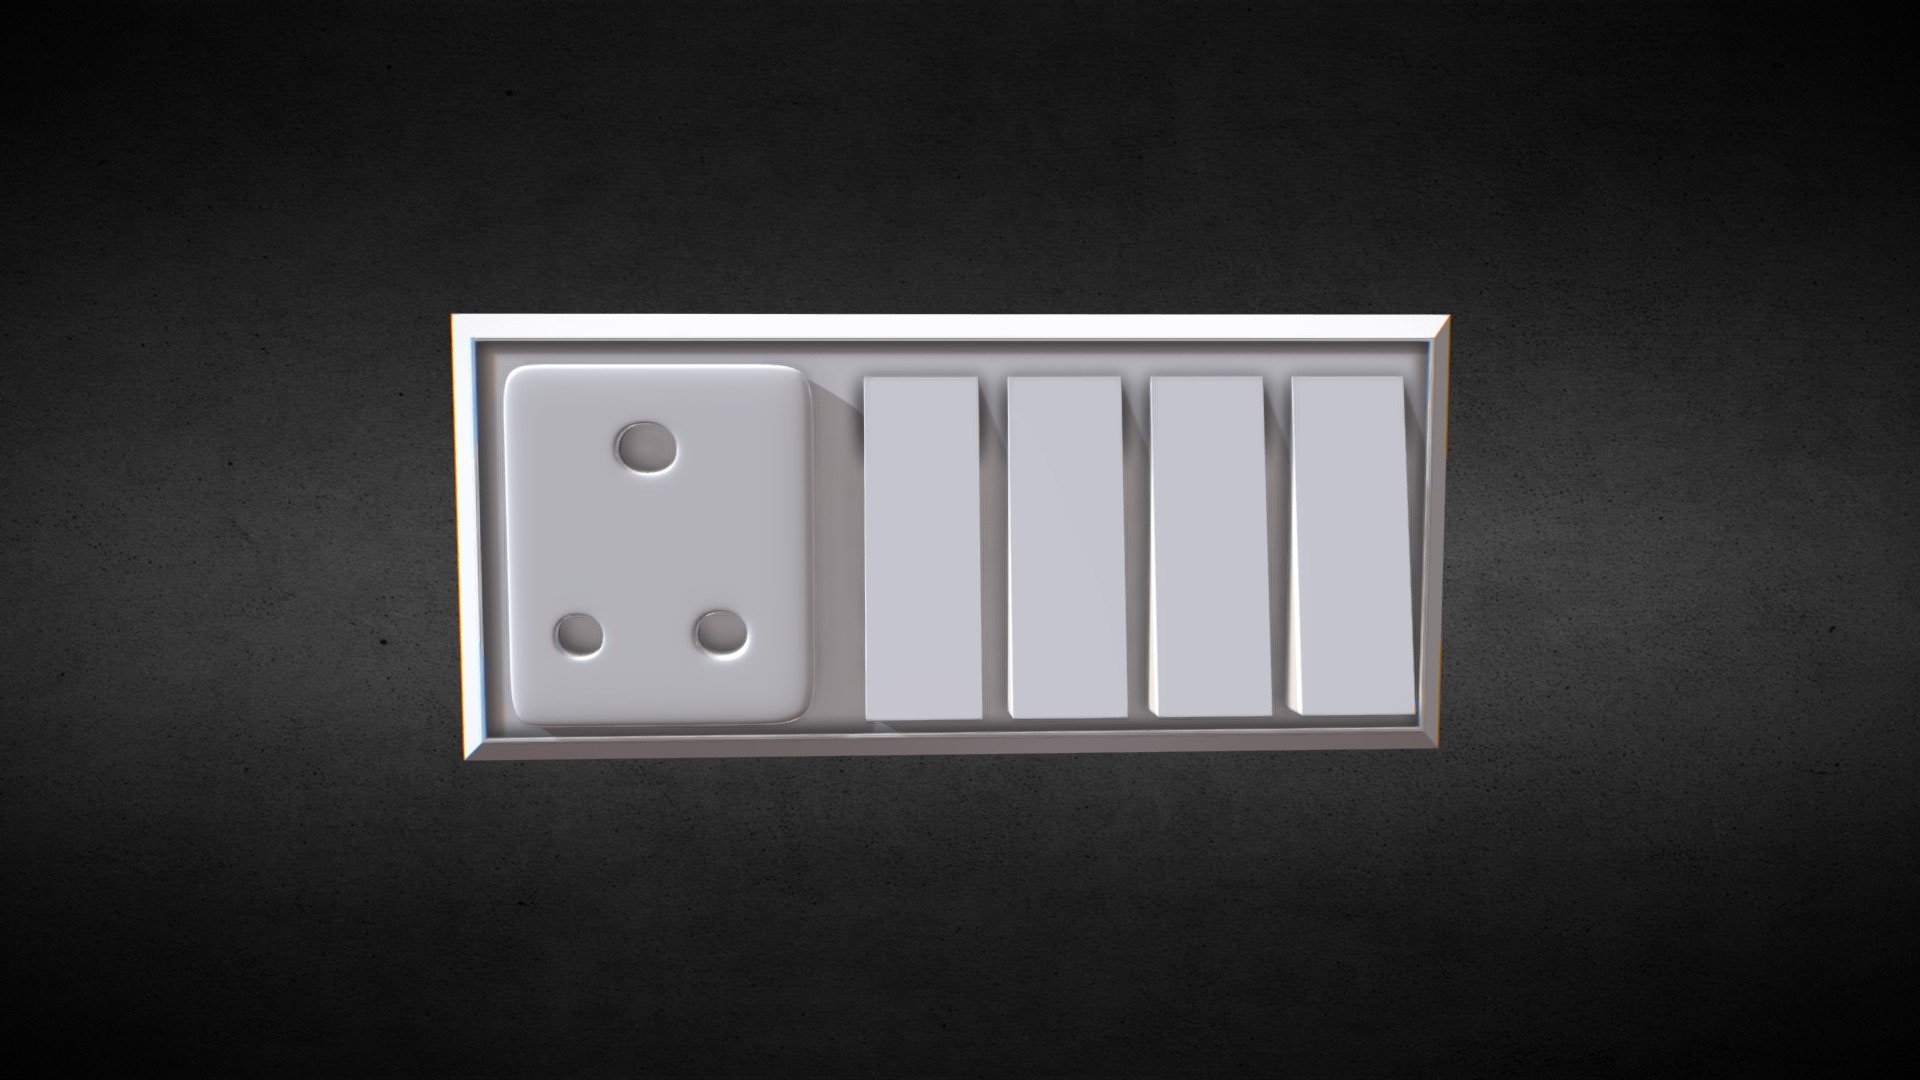 This is an Indian style Electrical switch board, Anyone can use it.
By adding little things like this makes your scene detailed and realistic

About Model:
Low poly mesh
Neat topology

Textures:
None

Render:https://bit.ly/3BZjGdB - Electrical Switch Board / Power Socket - Download Free 3D model by bhagathgoud 3d model